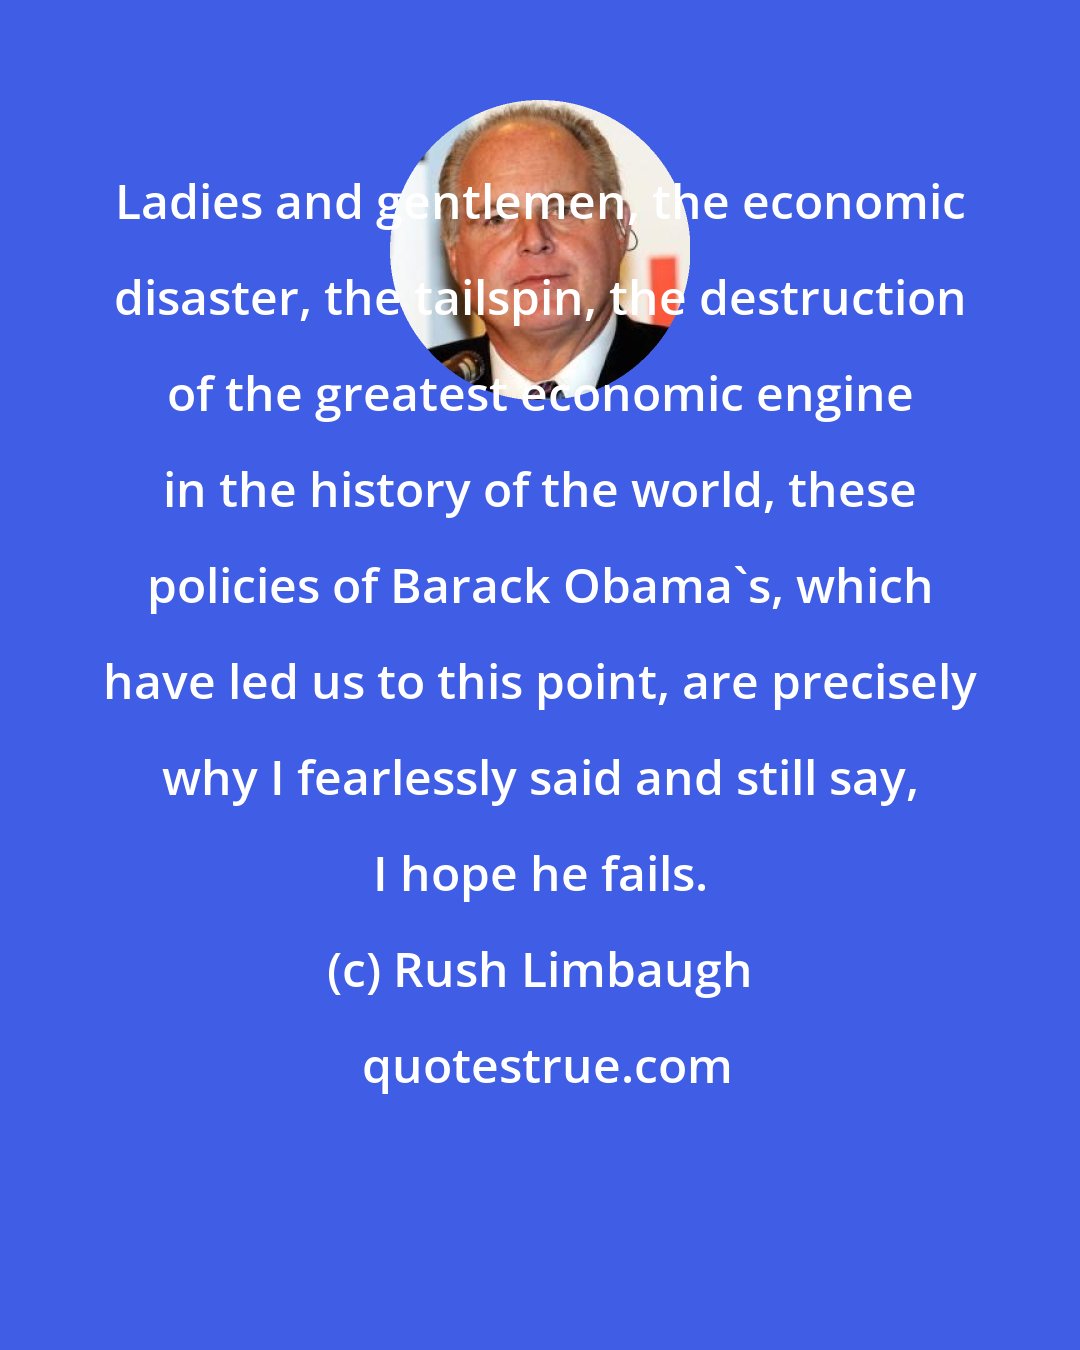 Rush Limbaugh: Ladies and gentlemen, the economic disaster, the tailspin, the destruction of the greatest economic engine in the history of the world, these policies of Barack Obama's, which have led us to this point, are precisely why I fearlessly said and still say, I hope he fails.